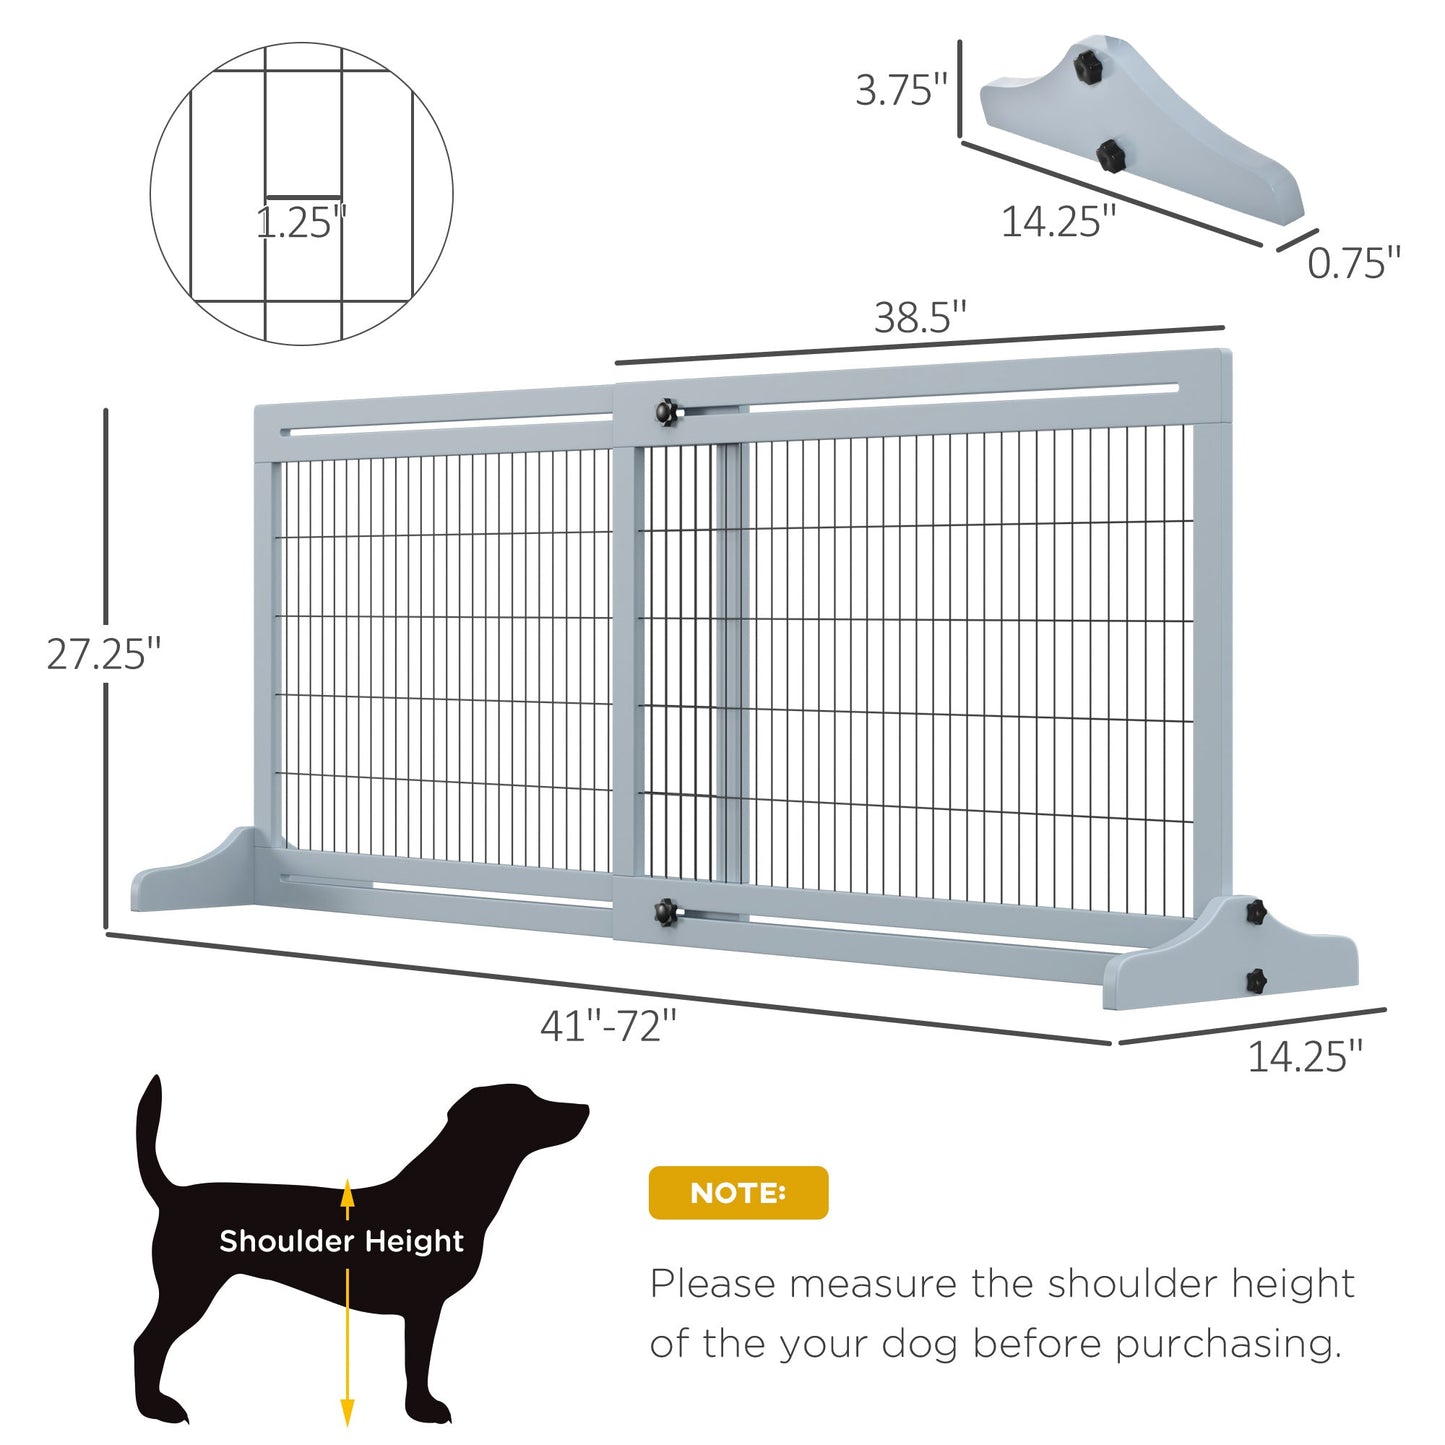 -PawHut 72" W x 27.25" H Extra Wide Dog Cat Fence, Freestanding Pet Gate with Adjustable Length, Barrier for House, Doorway 7 Hallway, Blue/Gray - Outdoor Style Company